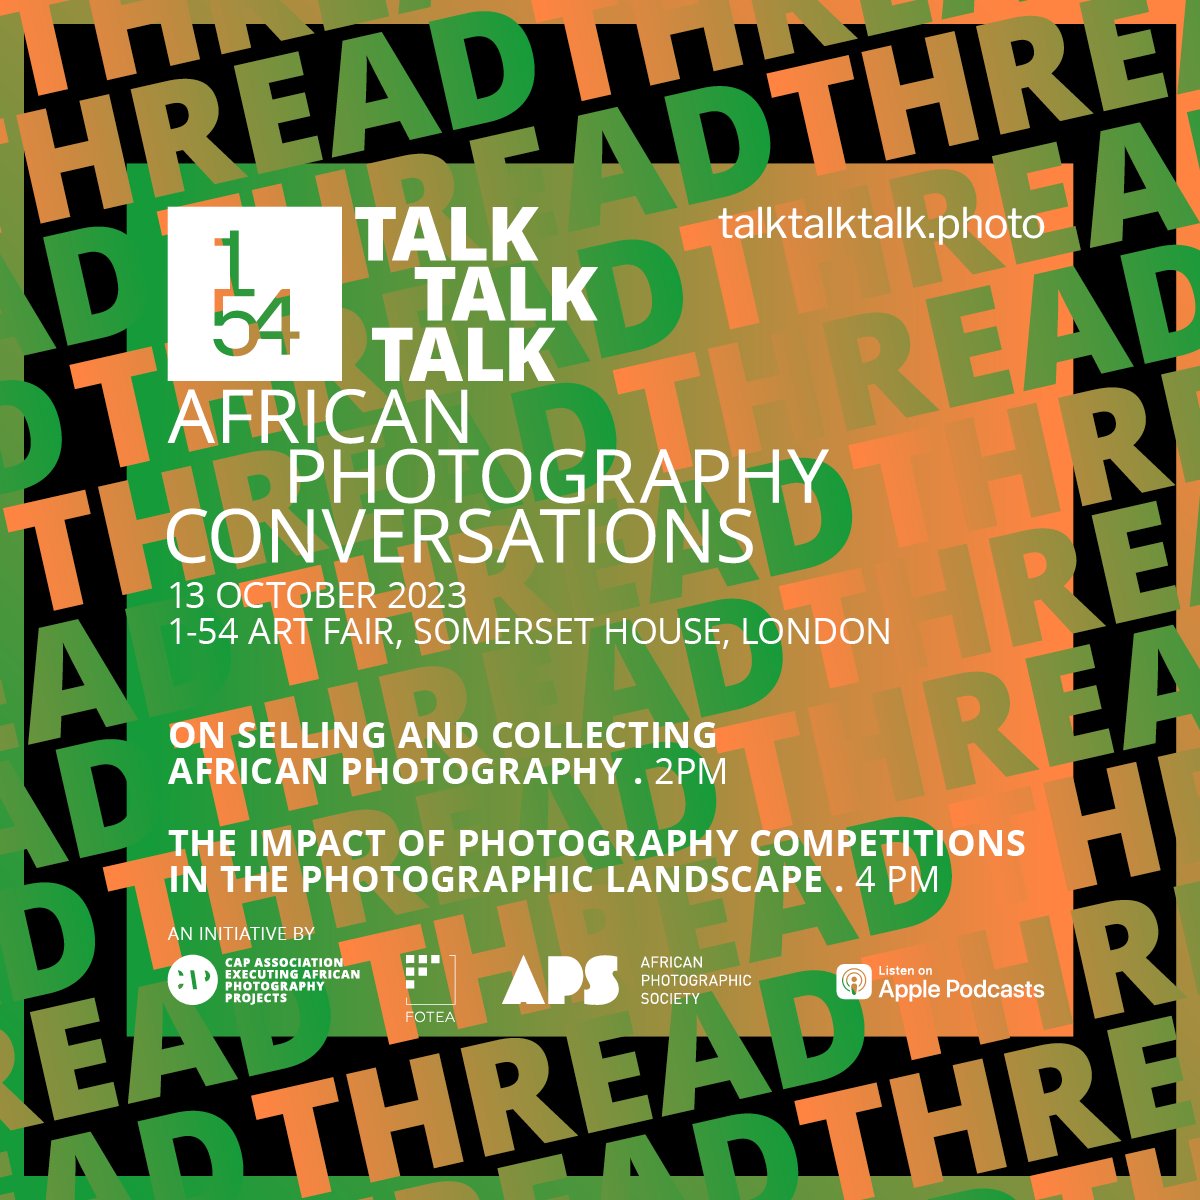 Join the @CAP_Prize at @154artfair for two panel discussions at @SomersetHouse with @PrixPictet, Deutsche Börse Photography Foundation Prize, and the James Barnor Prize. #africanphotography #capprize #talktalktalk